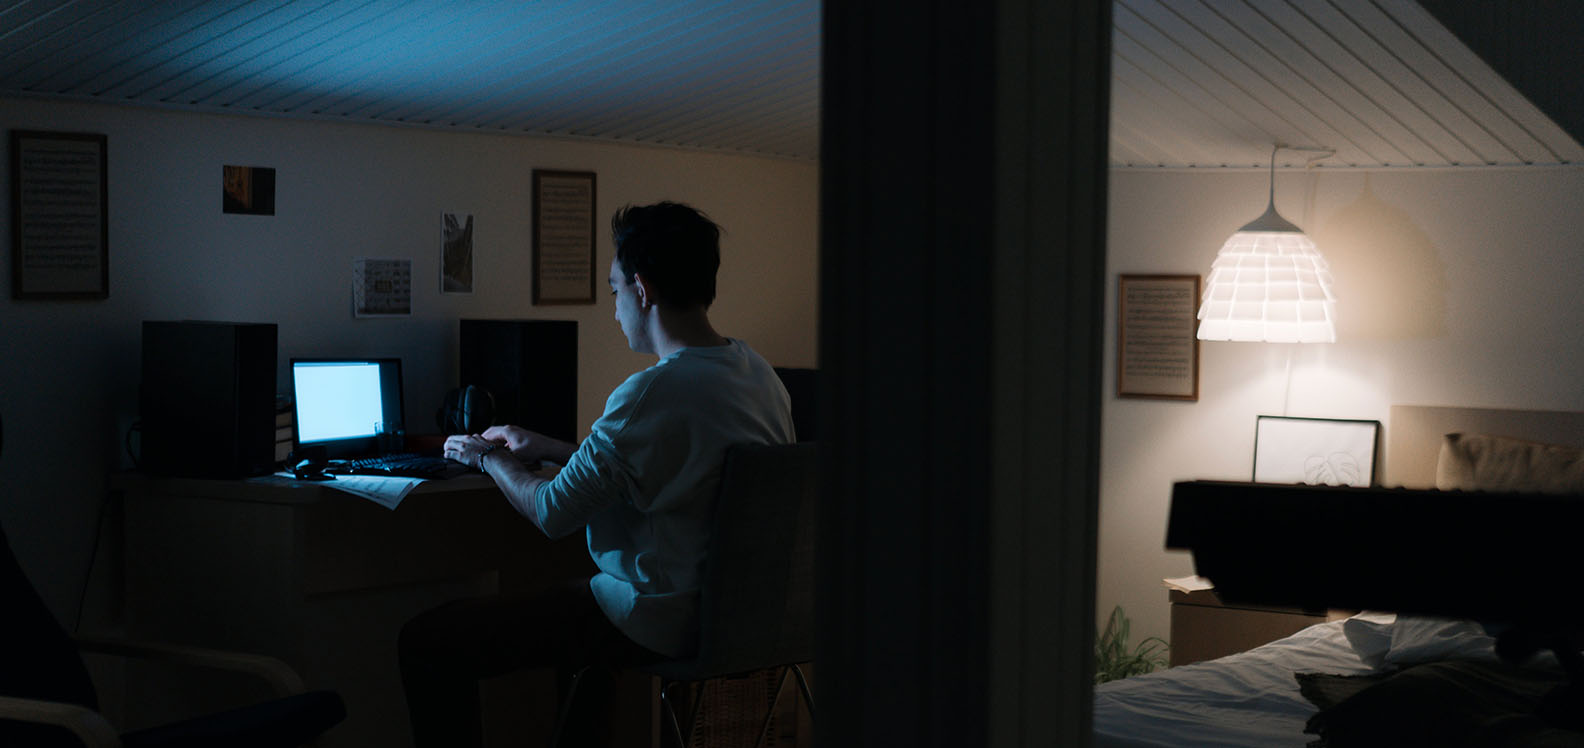 A young man alone in his darkened bedroom sat at a desk looking at his laptop